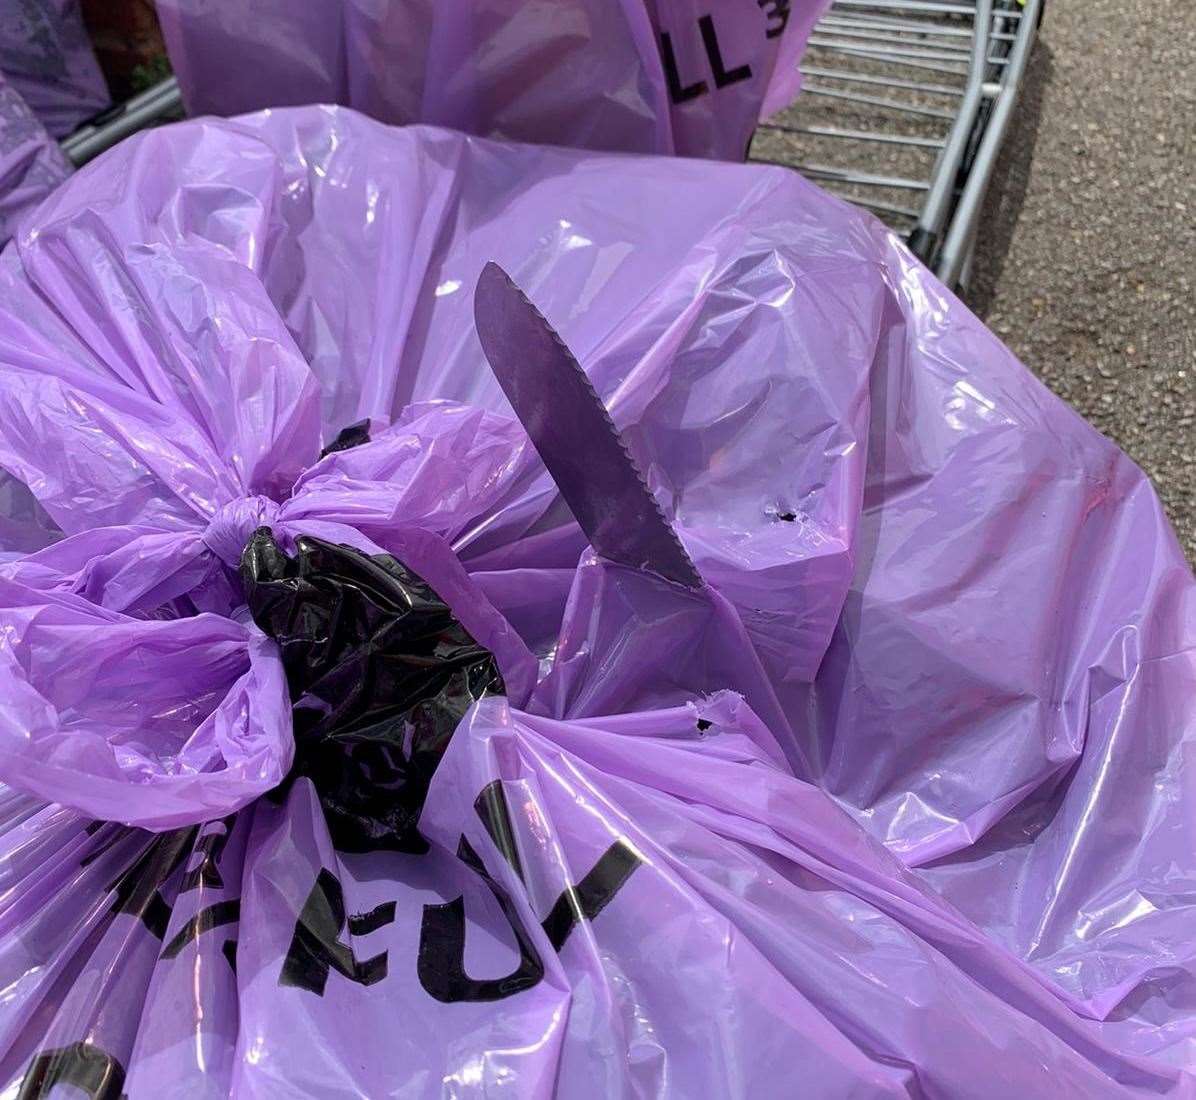 A knife can be seen poking out of a rubbish bag after a Serco crew member was involved in a near-miss. Picture: Canterbury City Council / Twitter